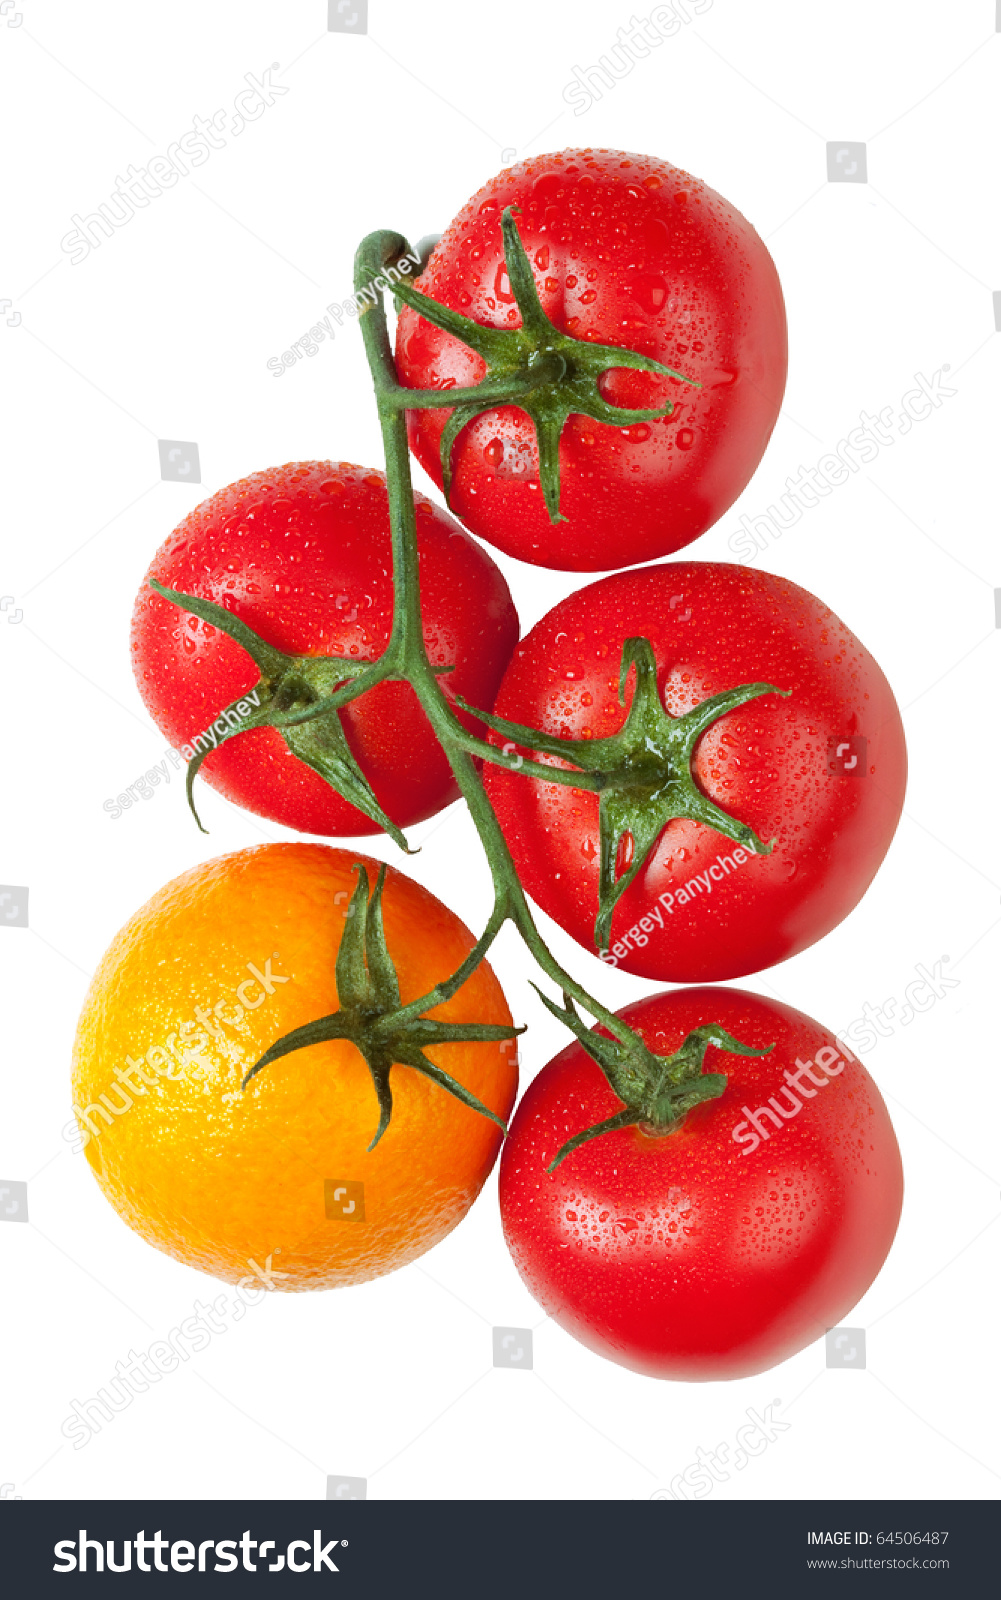 Orange On The Branche Of A Tomatoes Genetic Engineering Biotechnology Concept Image Isolated On A White Background